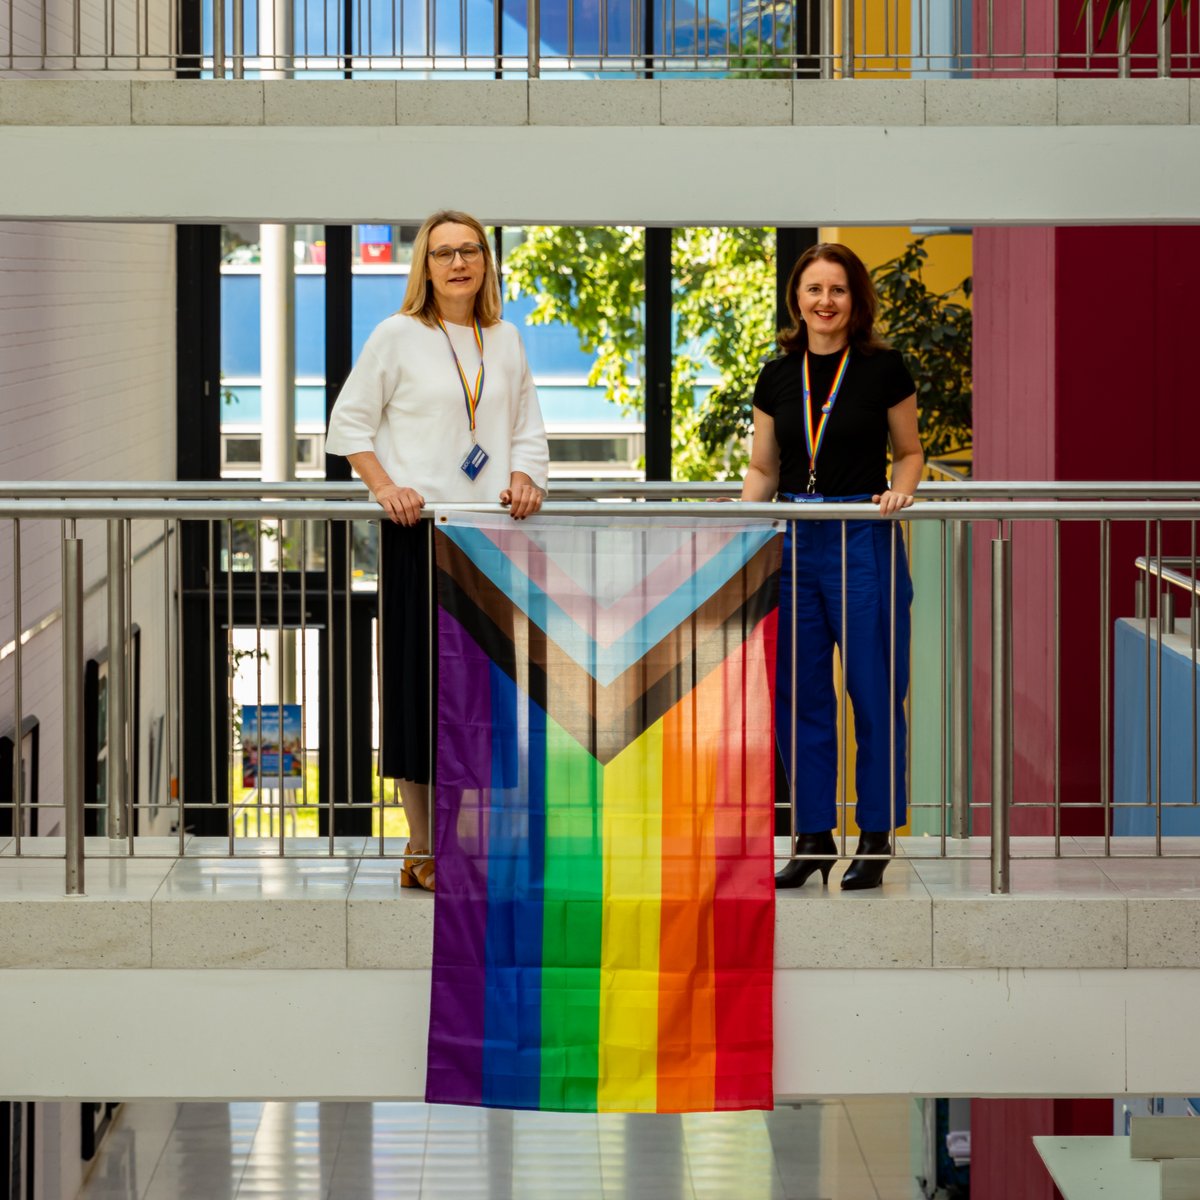 Our #mdcBerlin directors @msanderlab and @GraHeike are celebrating #diversity during #PrideMonth Berlin! You want to learn more about #inclusivity and diversity in #science or show your support? Join tomorrow's #PrideMDC23 symposium! More 👉mdc-berlin.de/pride-mdc2023 #LGBTQ+